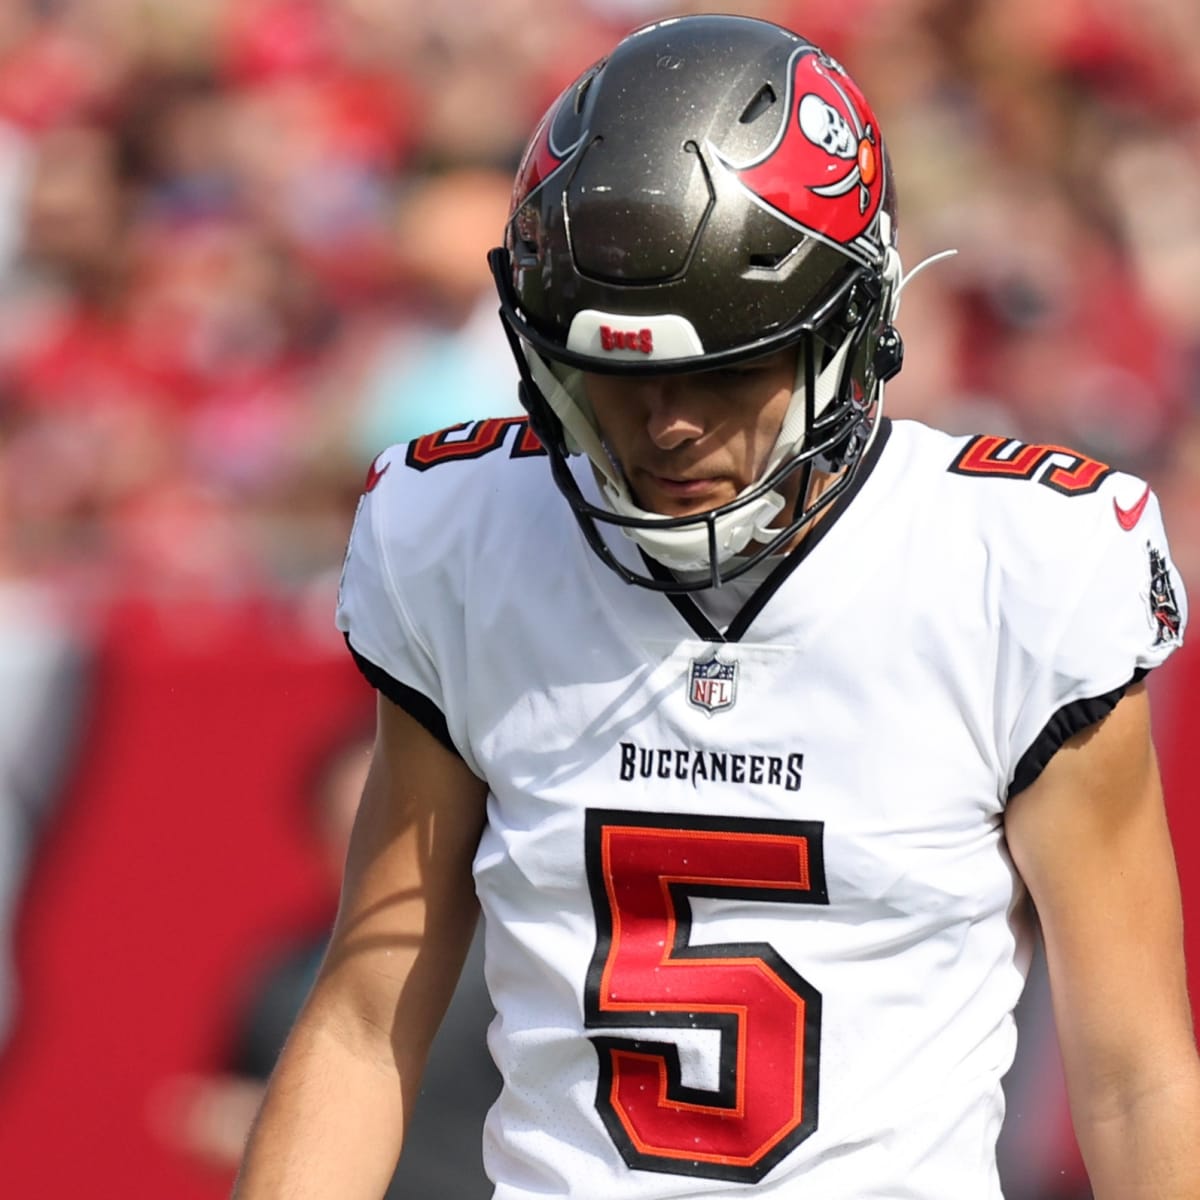 Bucs' Jake Camarda Unleashes the Most Beautiful Ugly Punt in Win